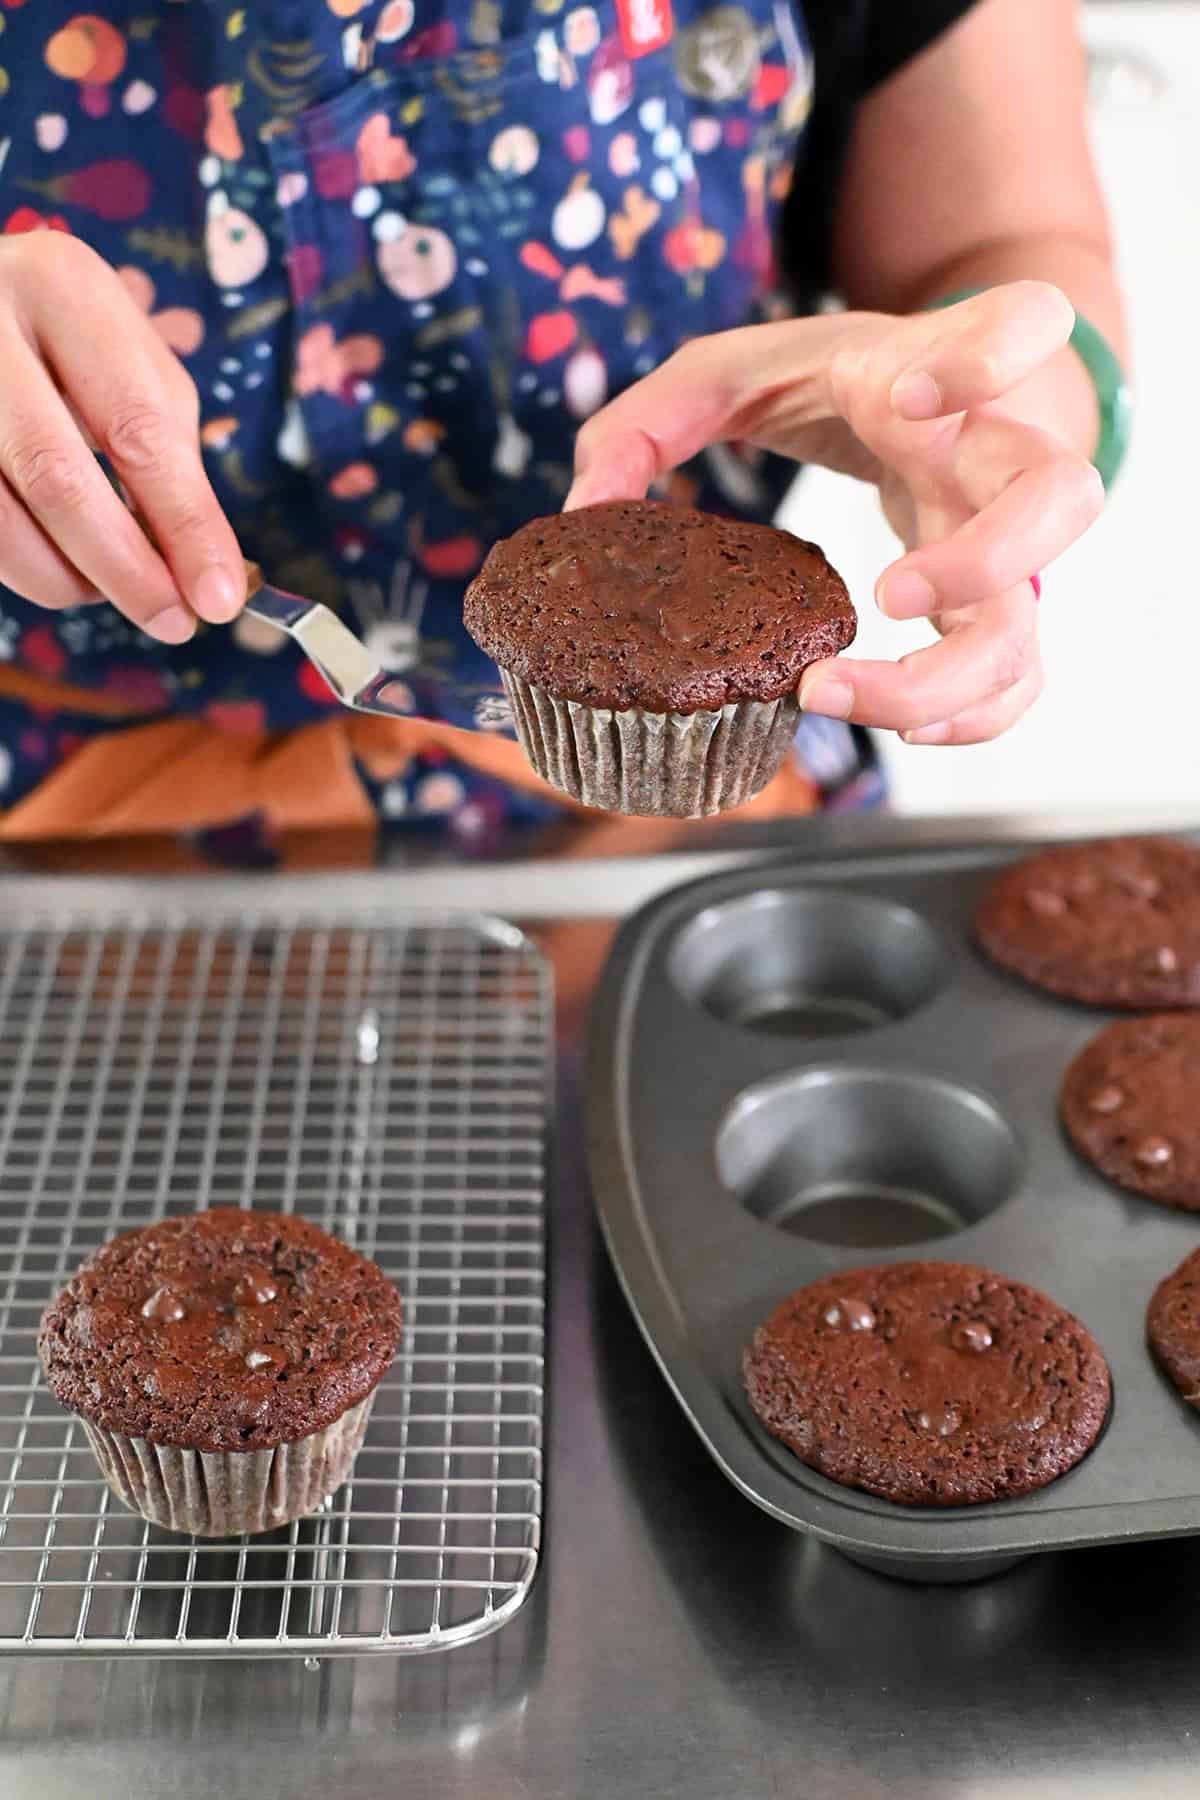 Lifting a freshly baked chocolate zucchini muffin from the tin and putting it on a cooling rack.